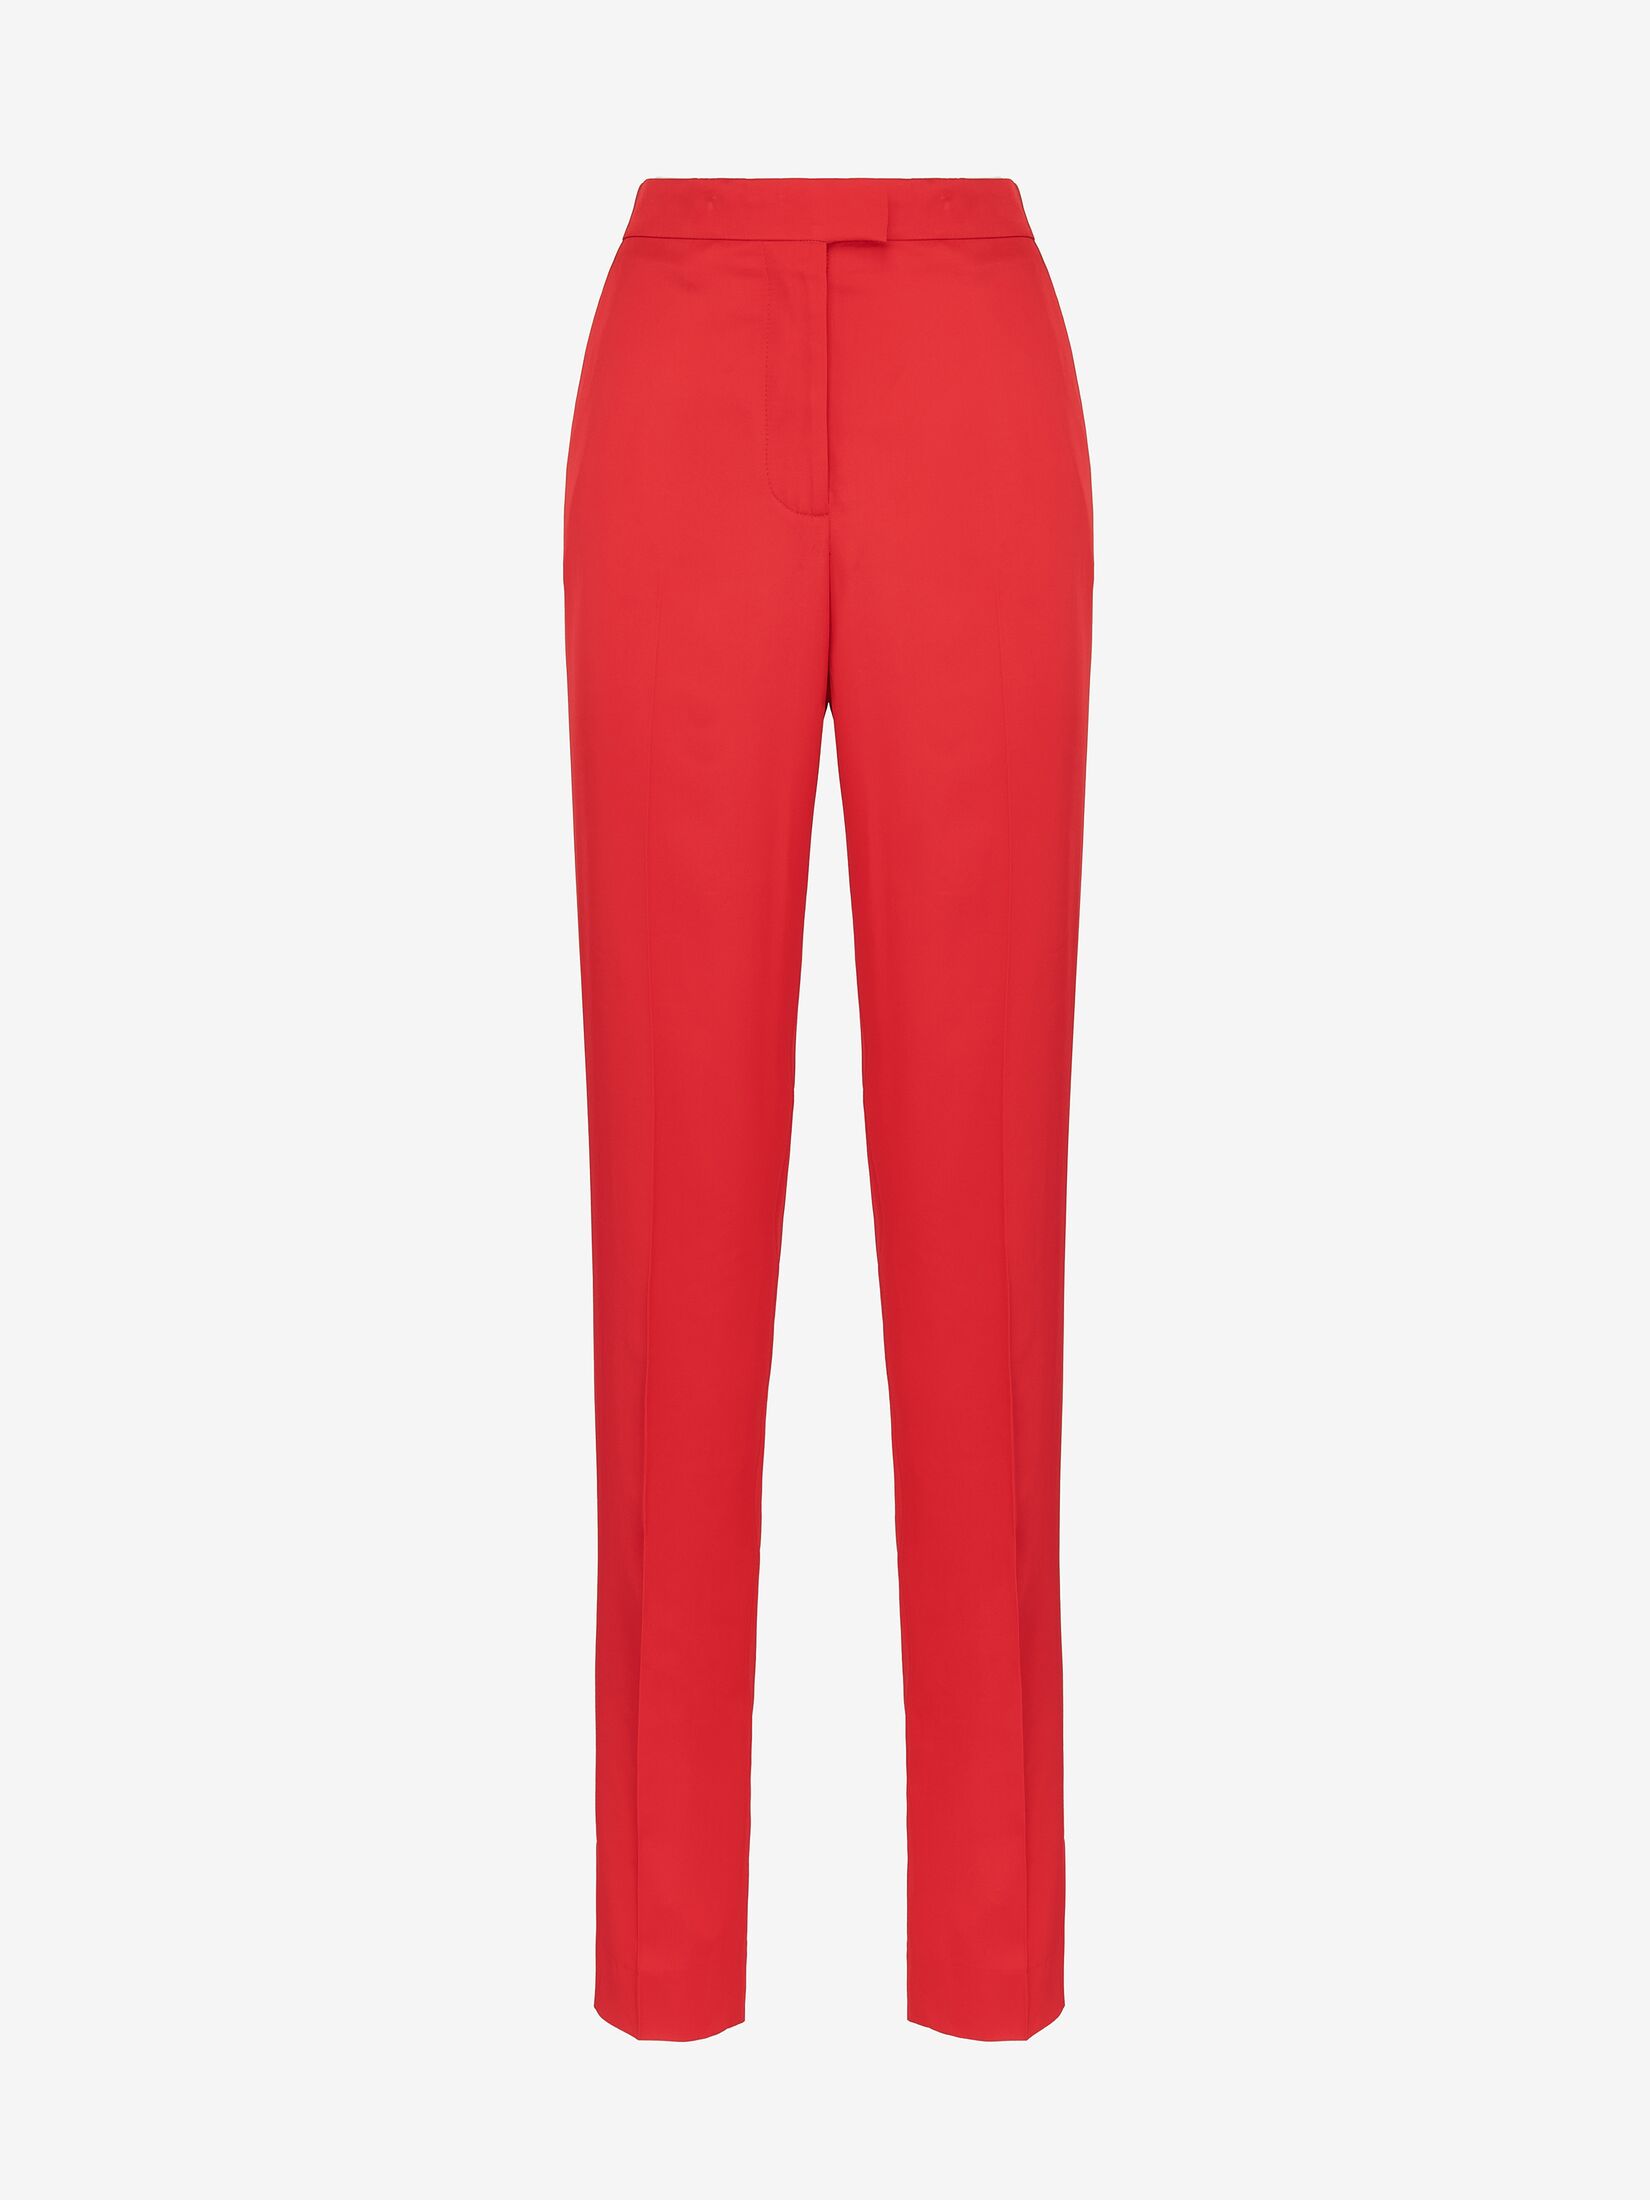 High-waisted Cigarette Trousers in Lust Red